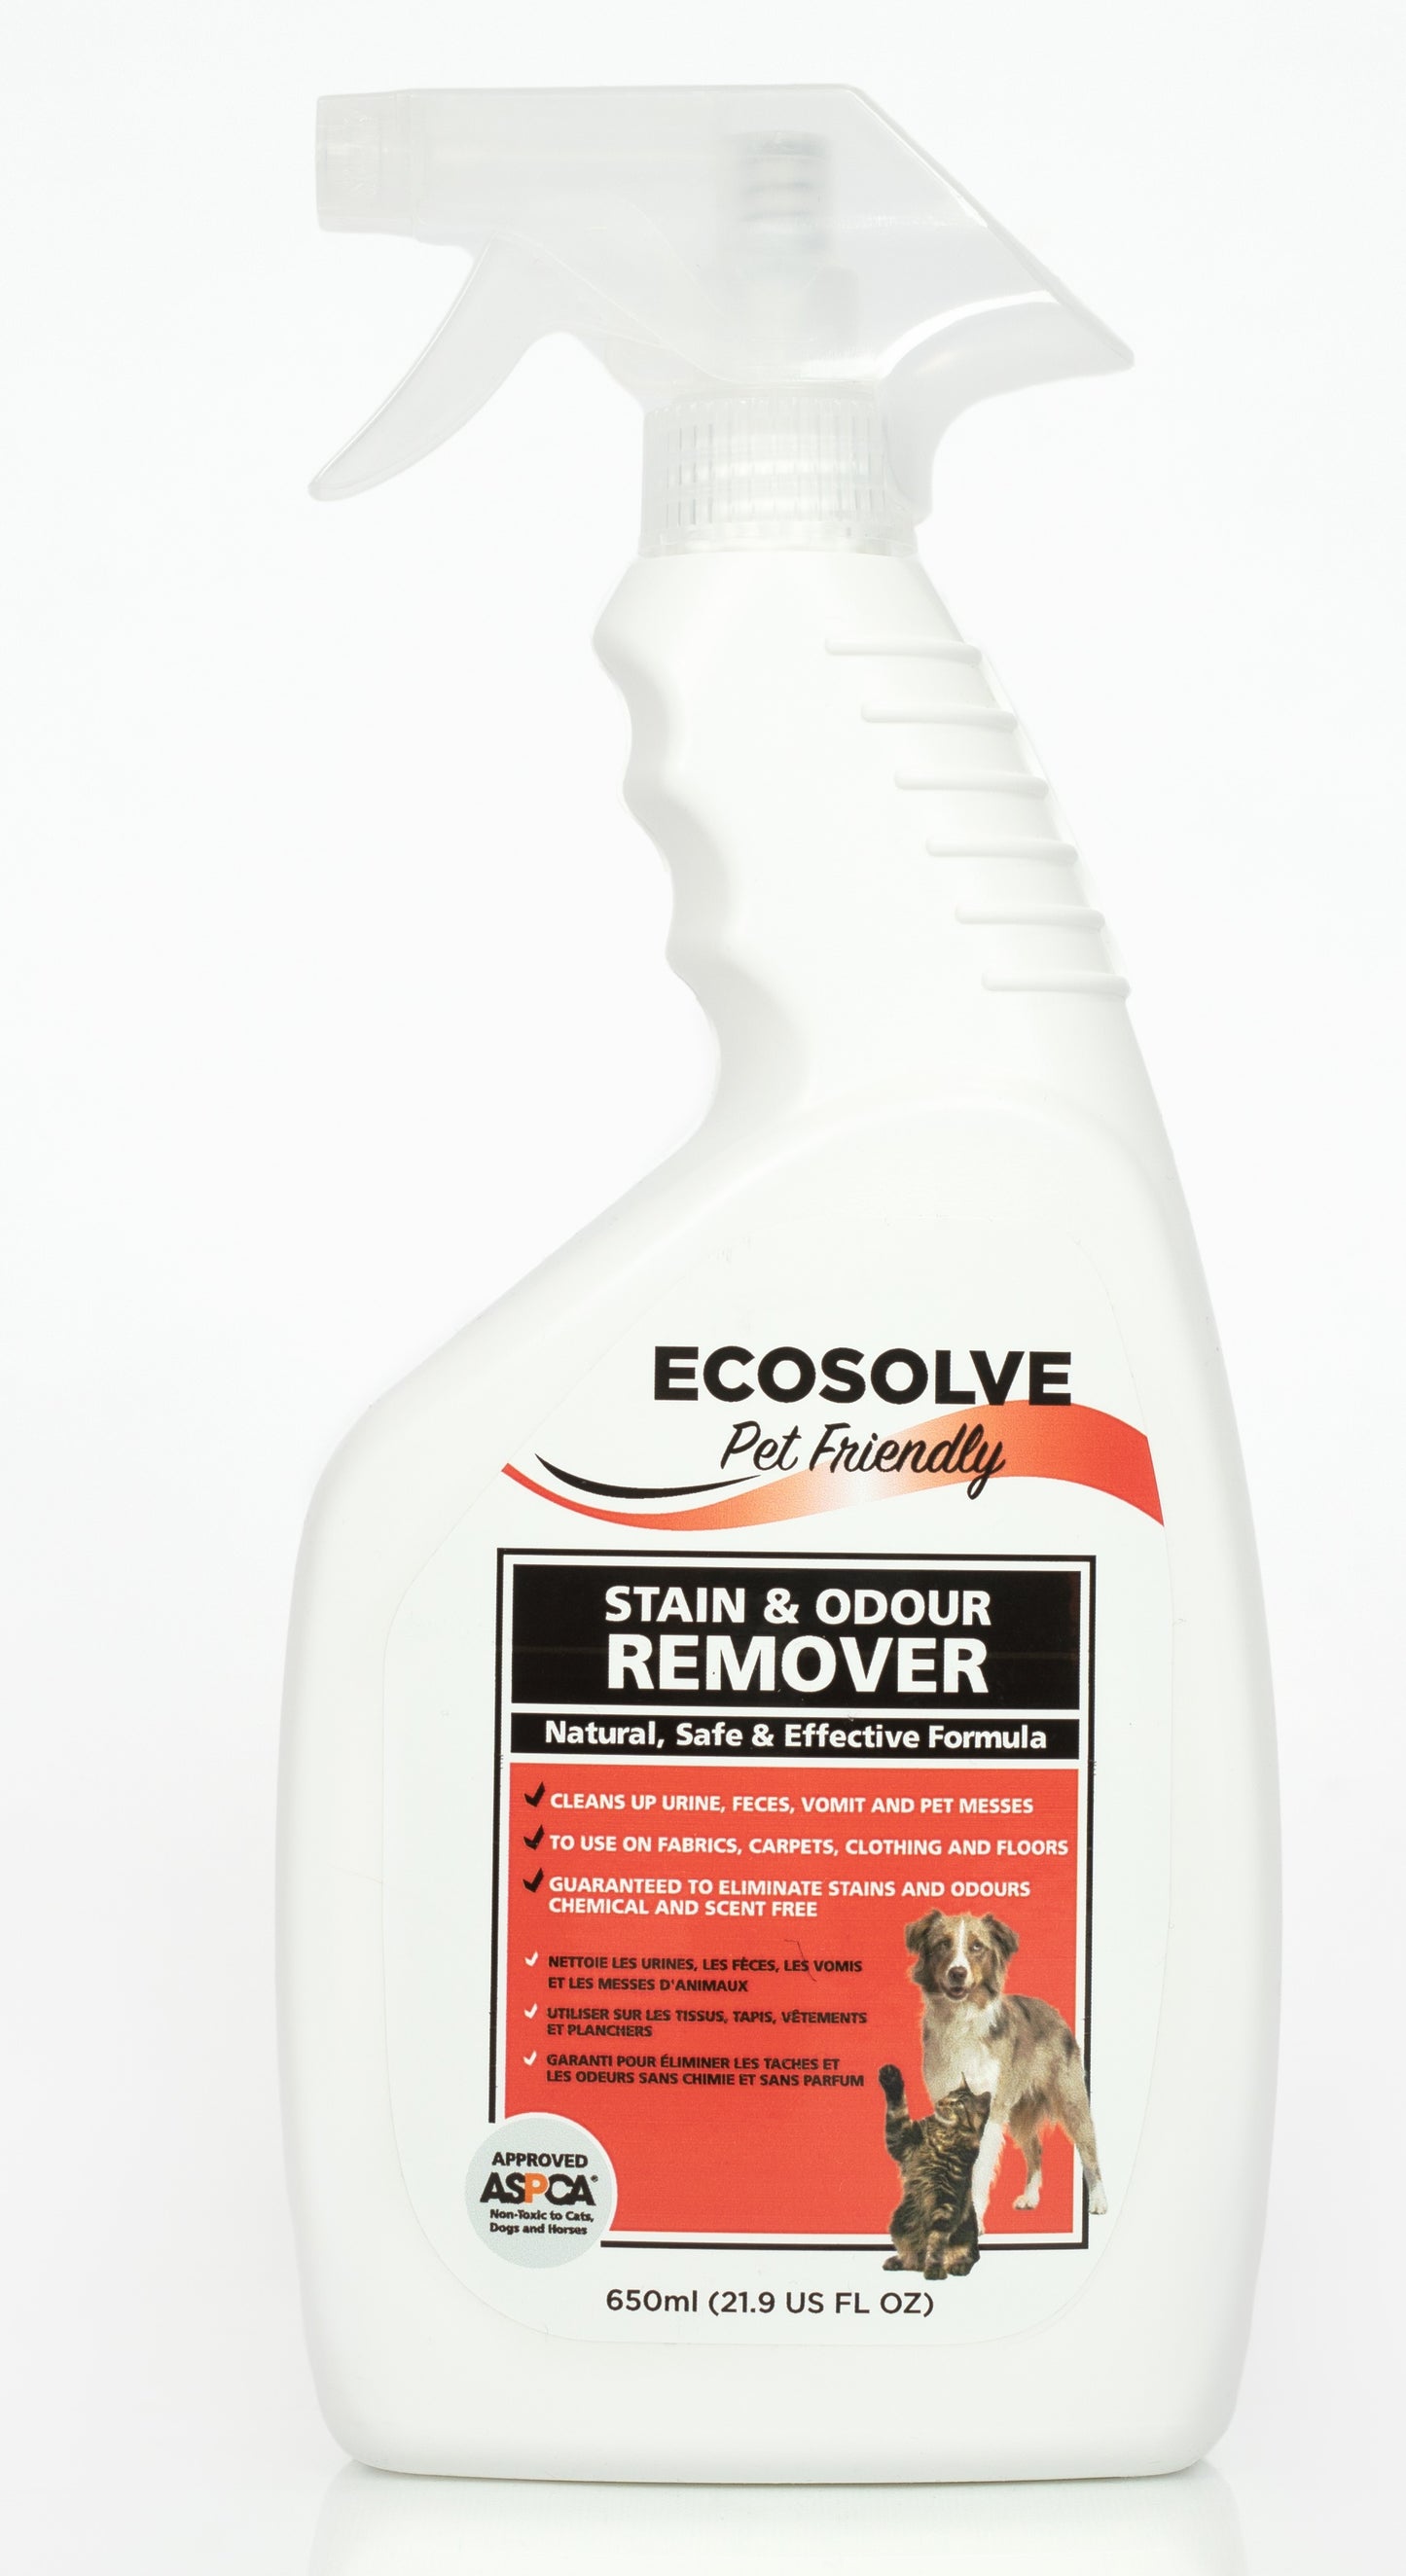 ECOSOLVE Stain & Odour Remover, 650ml